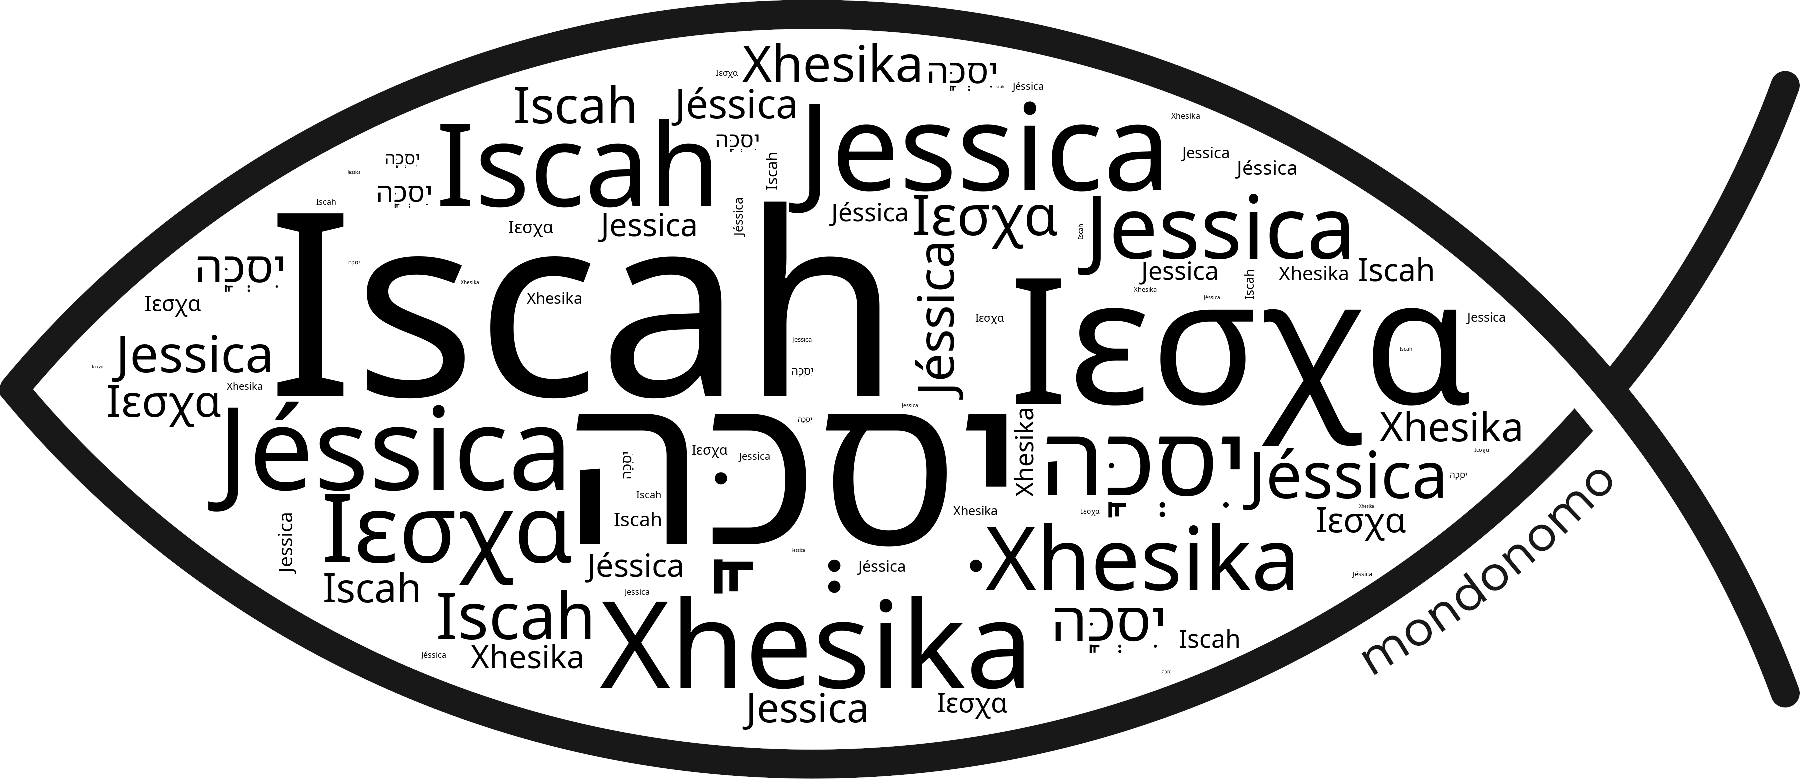 Name Iscah in the world's Bibles